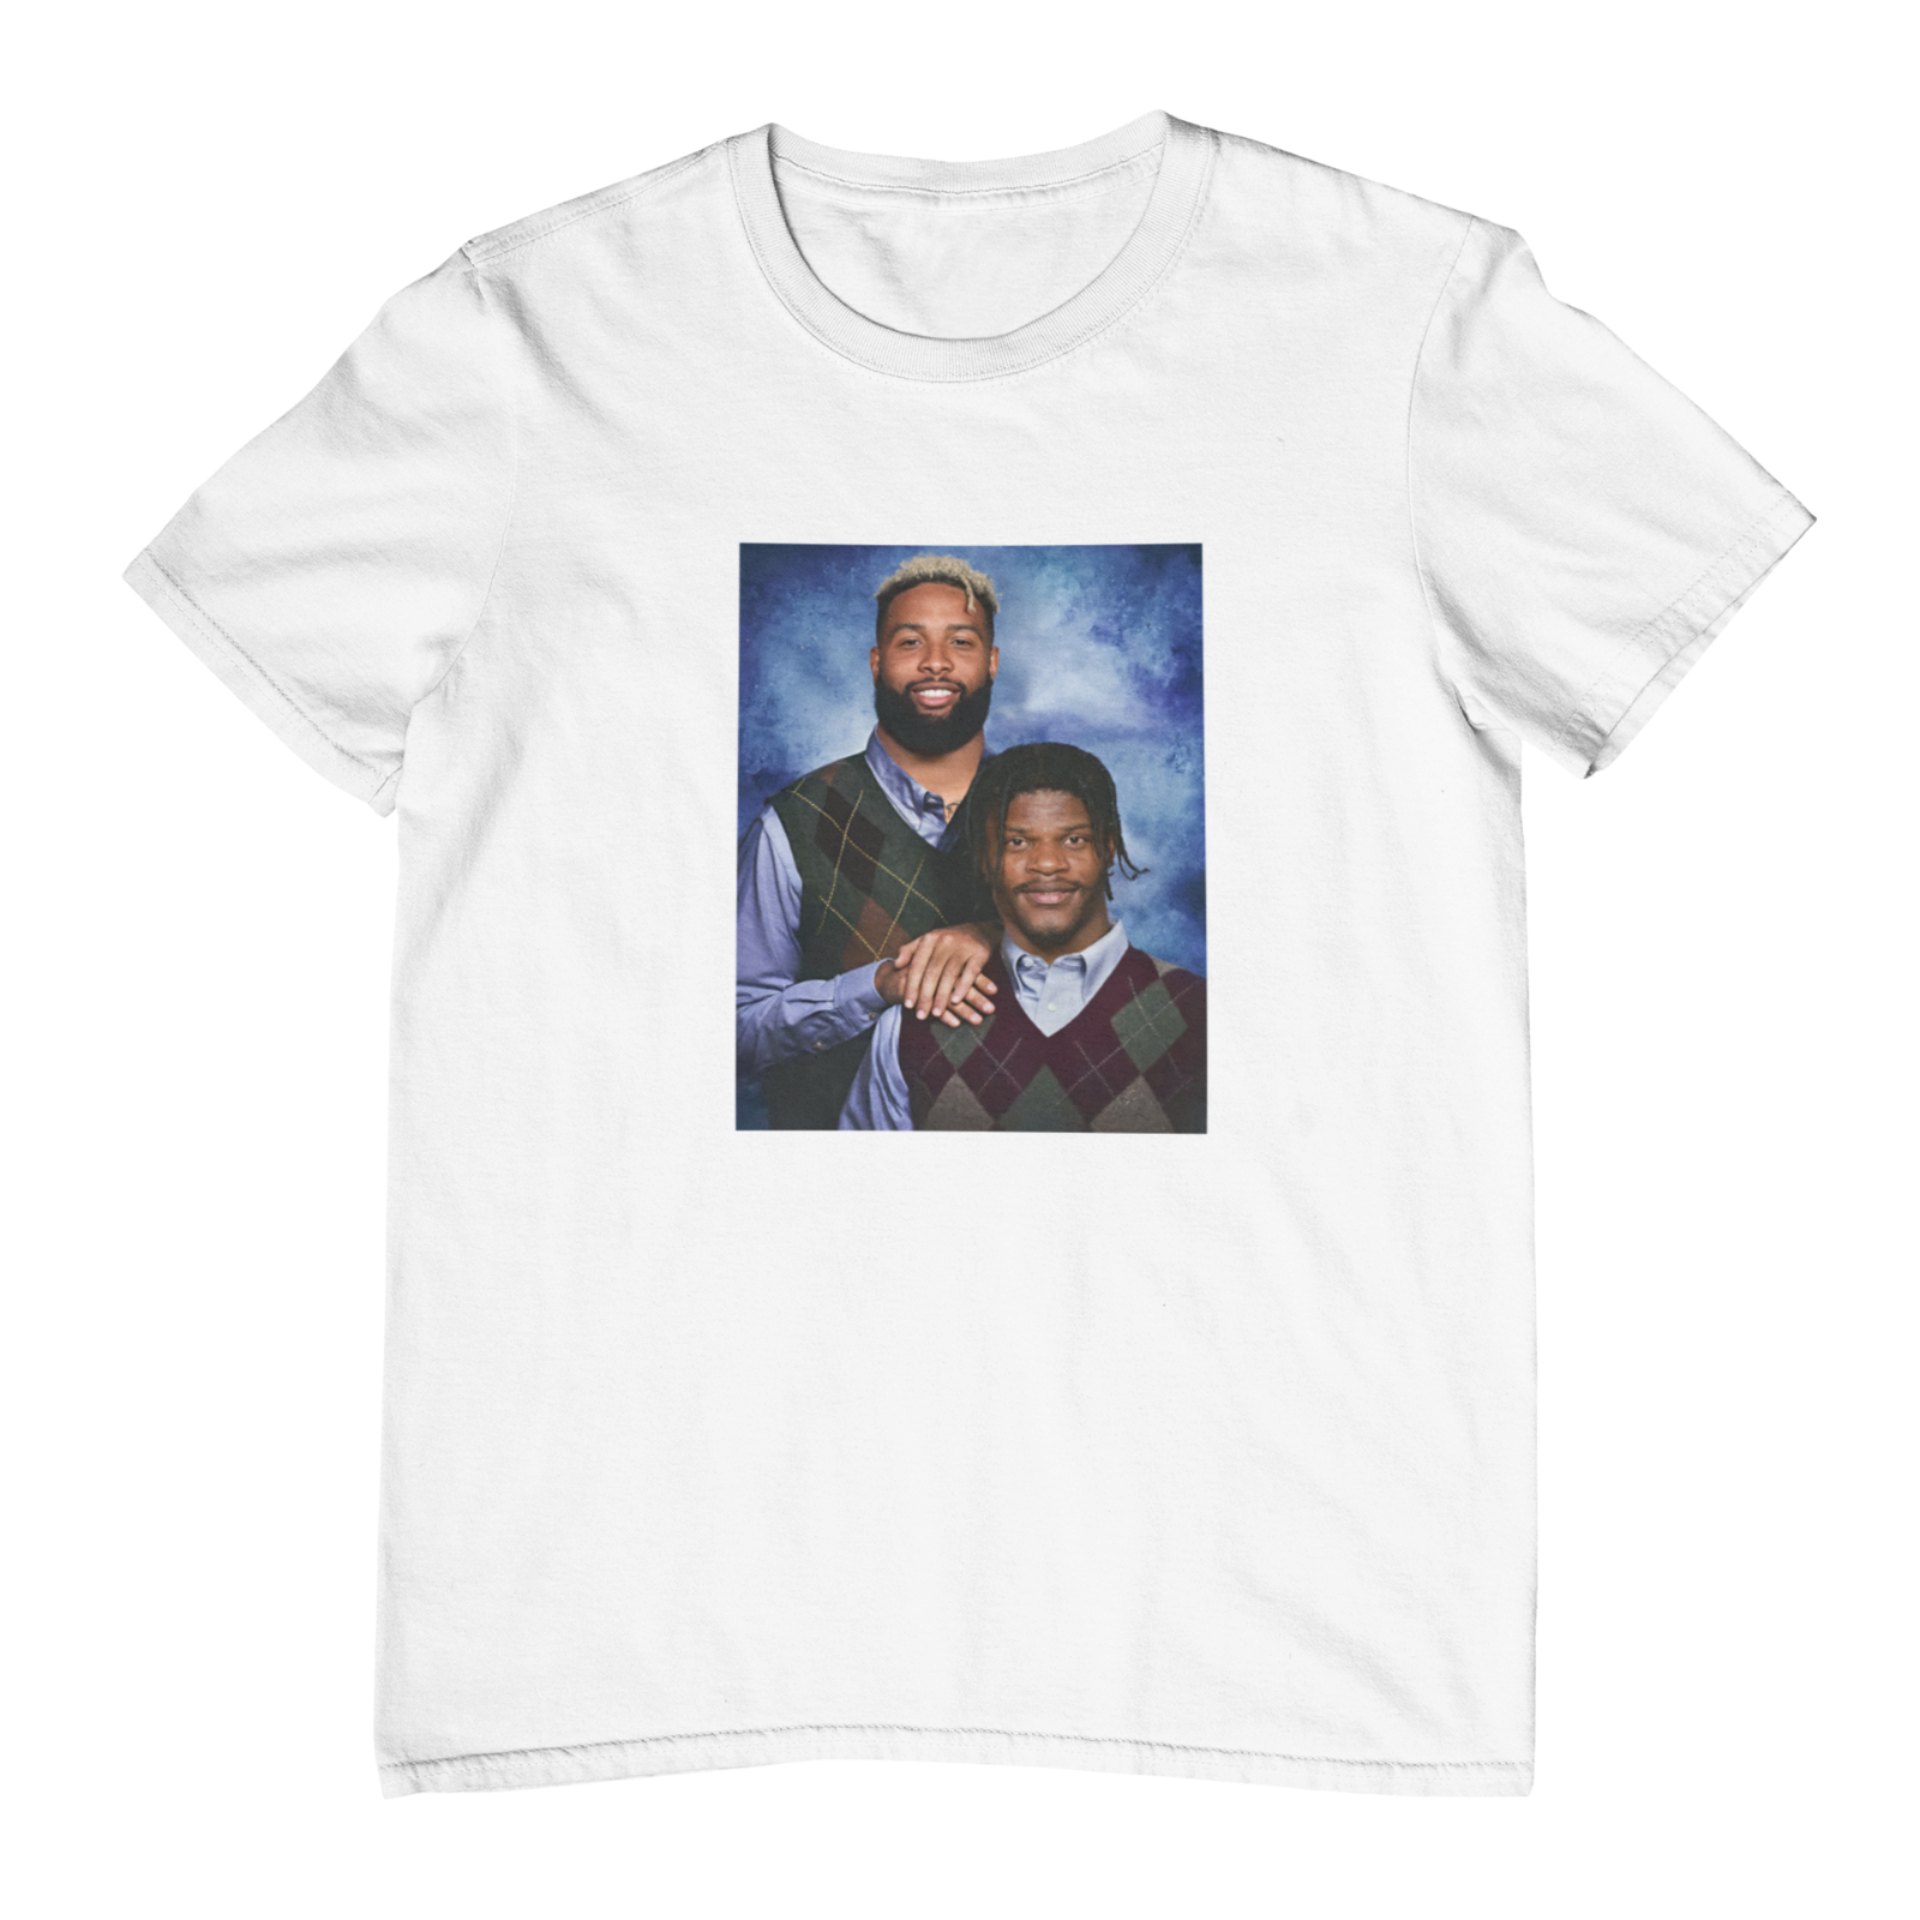 File Description: This image depicts a humorous family portrait on a T-shirt. Lamar Jackson and Odell Beckham Jr. are seated together, recreating the iconic "Stepbrothers" movie poster. The two football stars are dressed casually and share a comical resemblance to the movie characters, adding a touch of fun to the design.